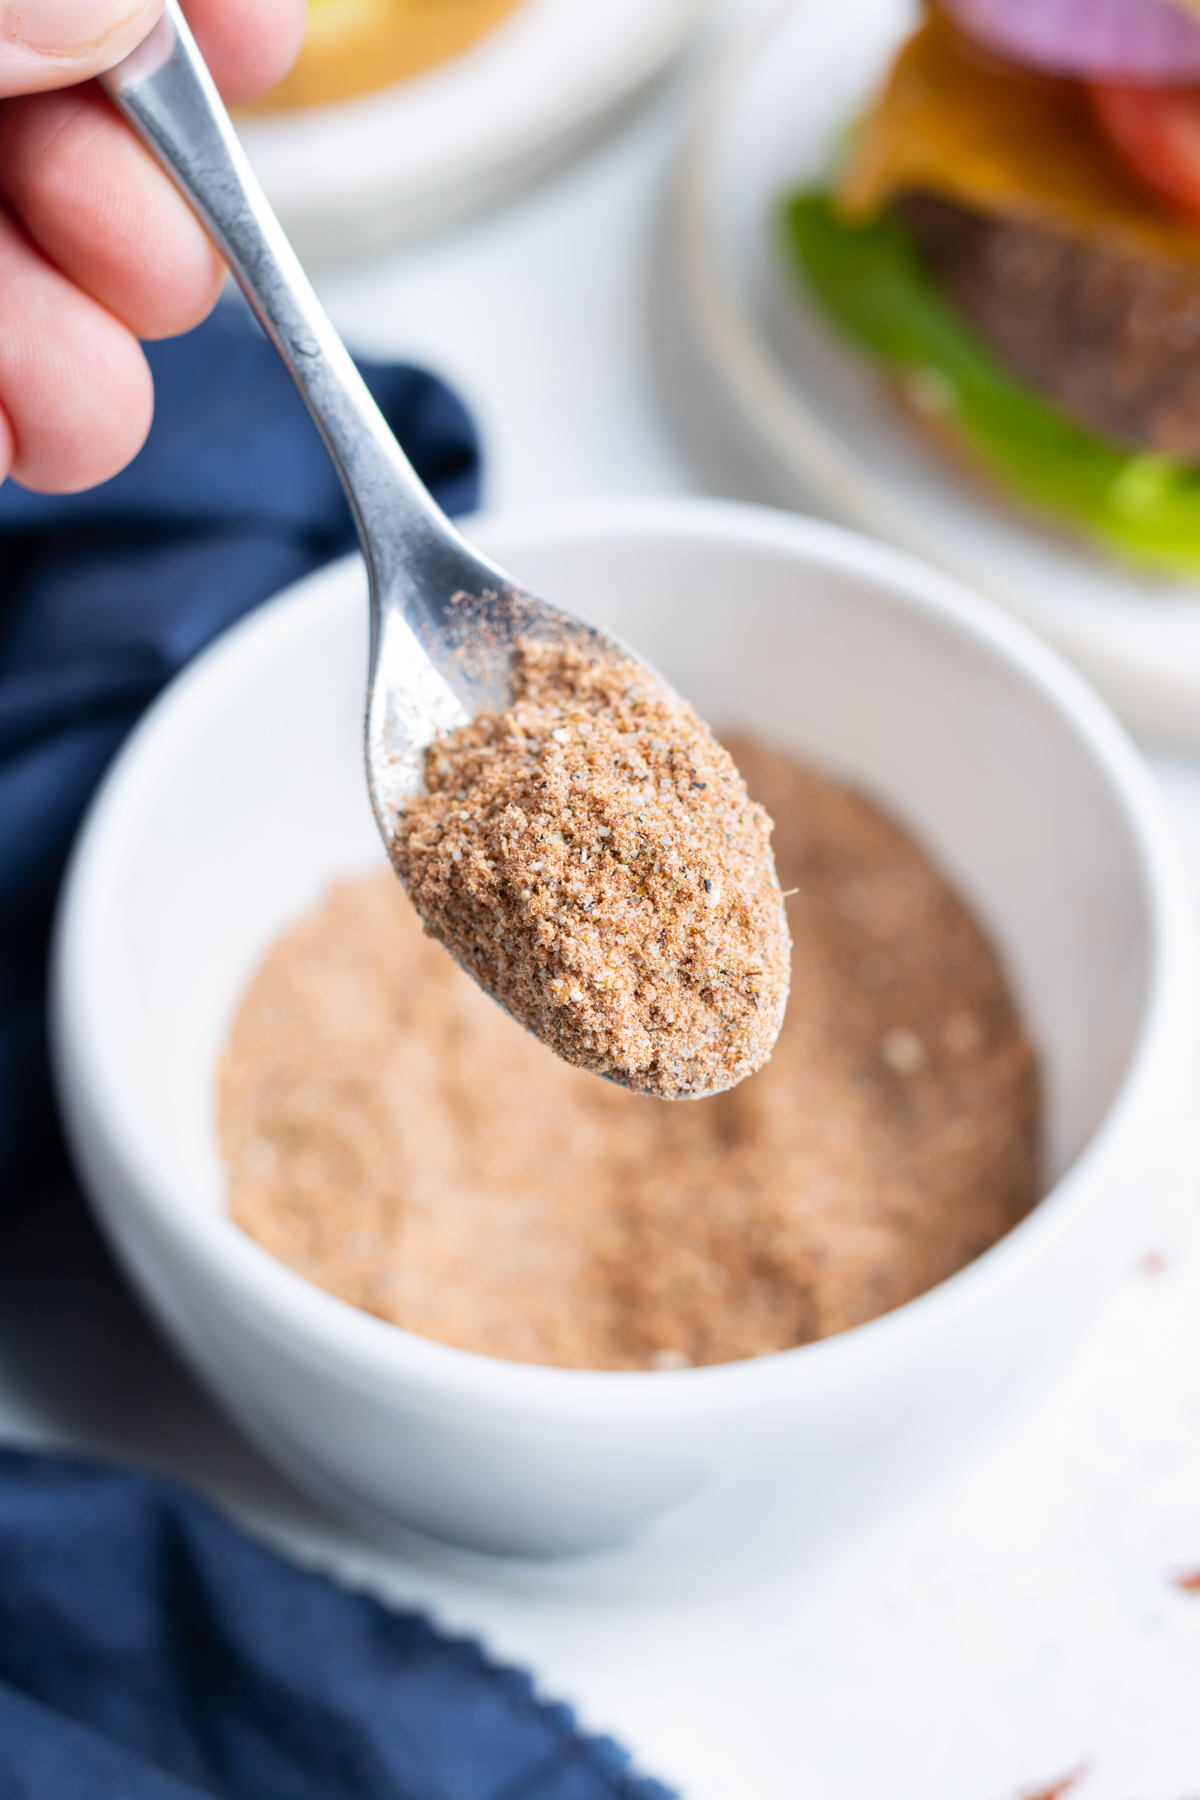 A spoon is shown holding homemade burger seasoning before using.